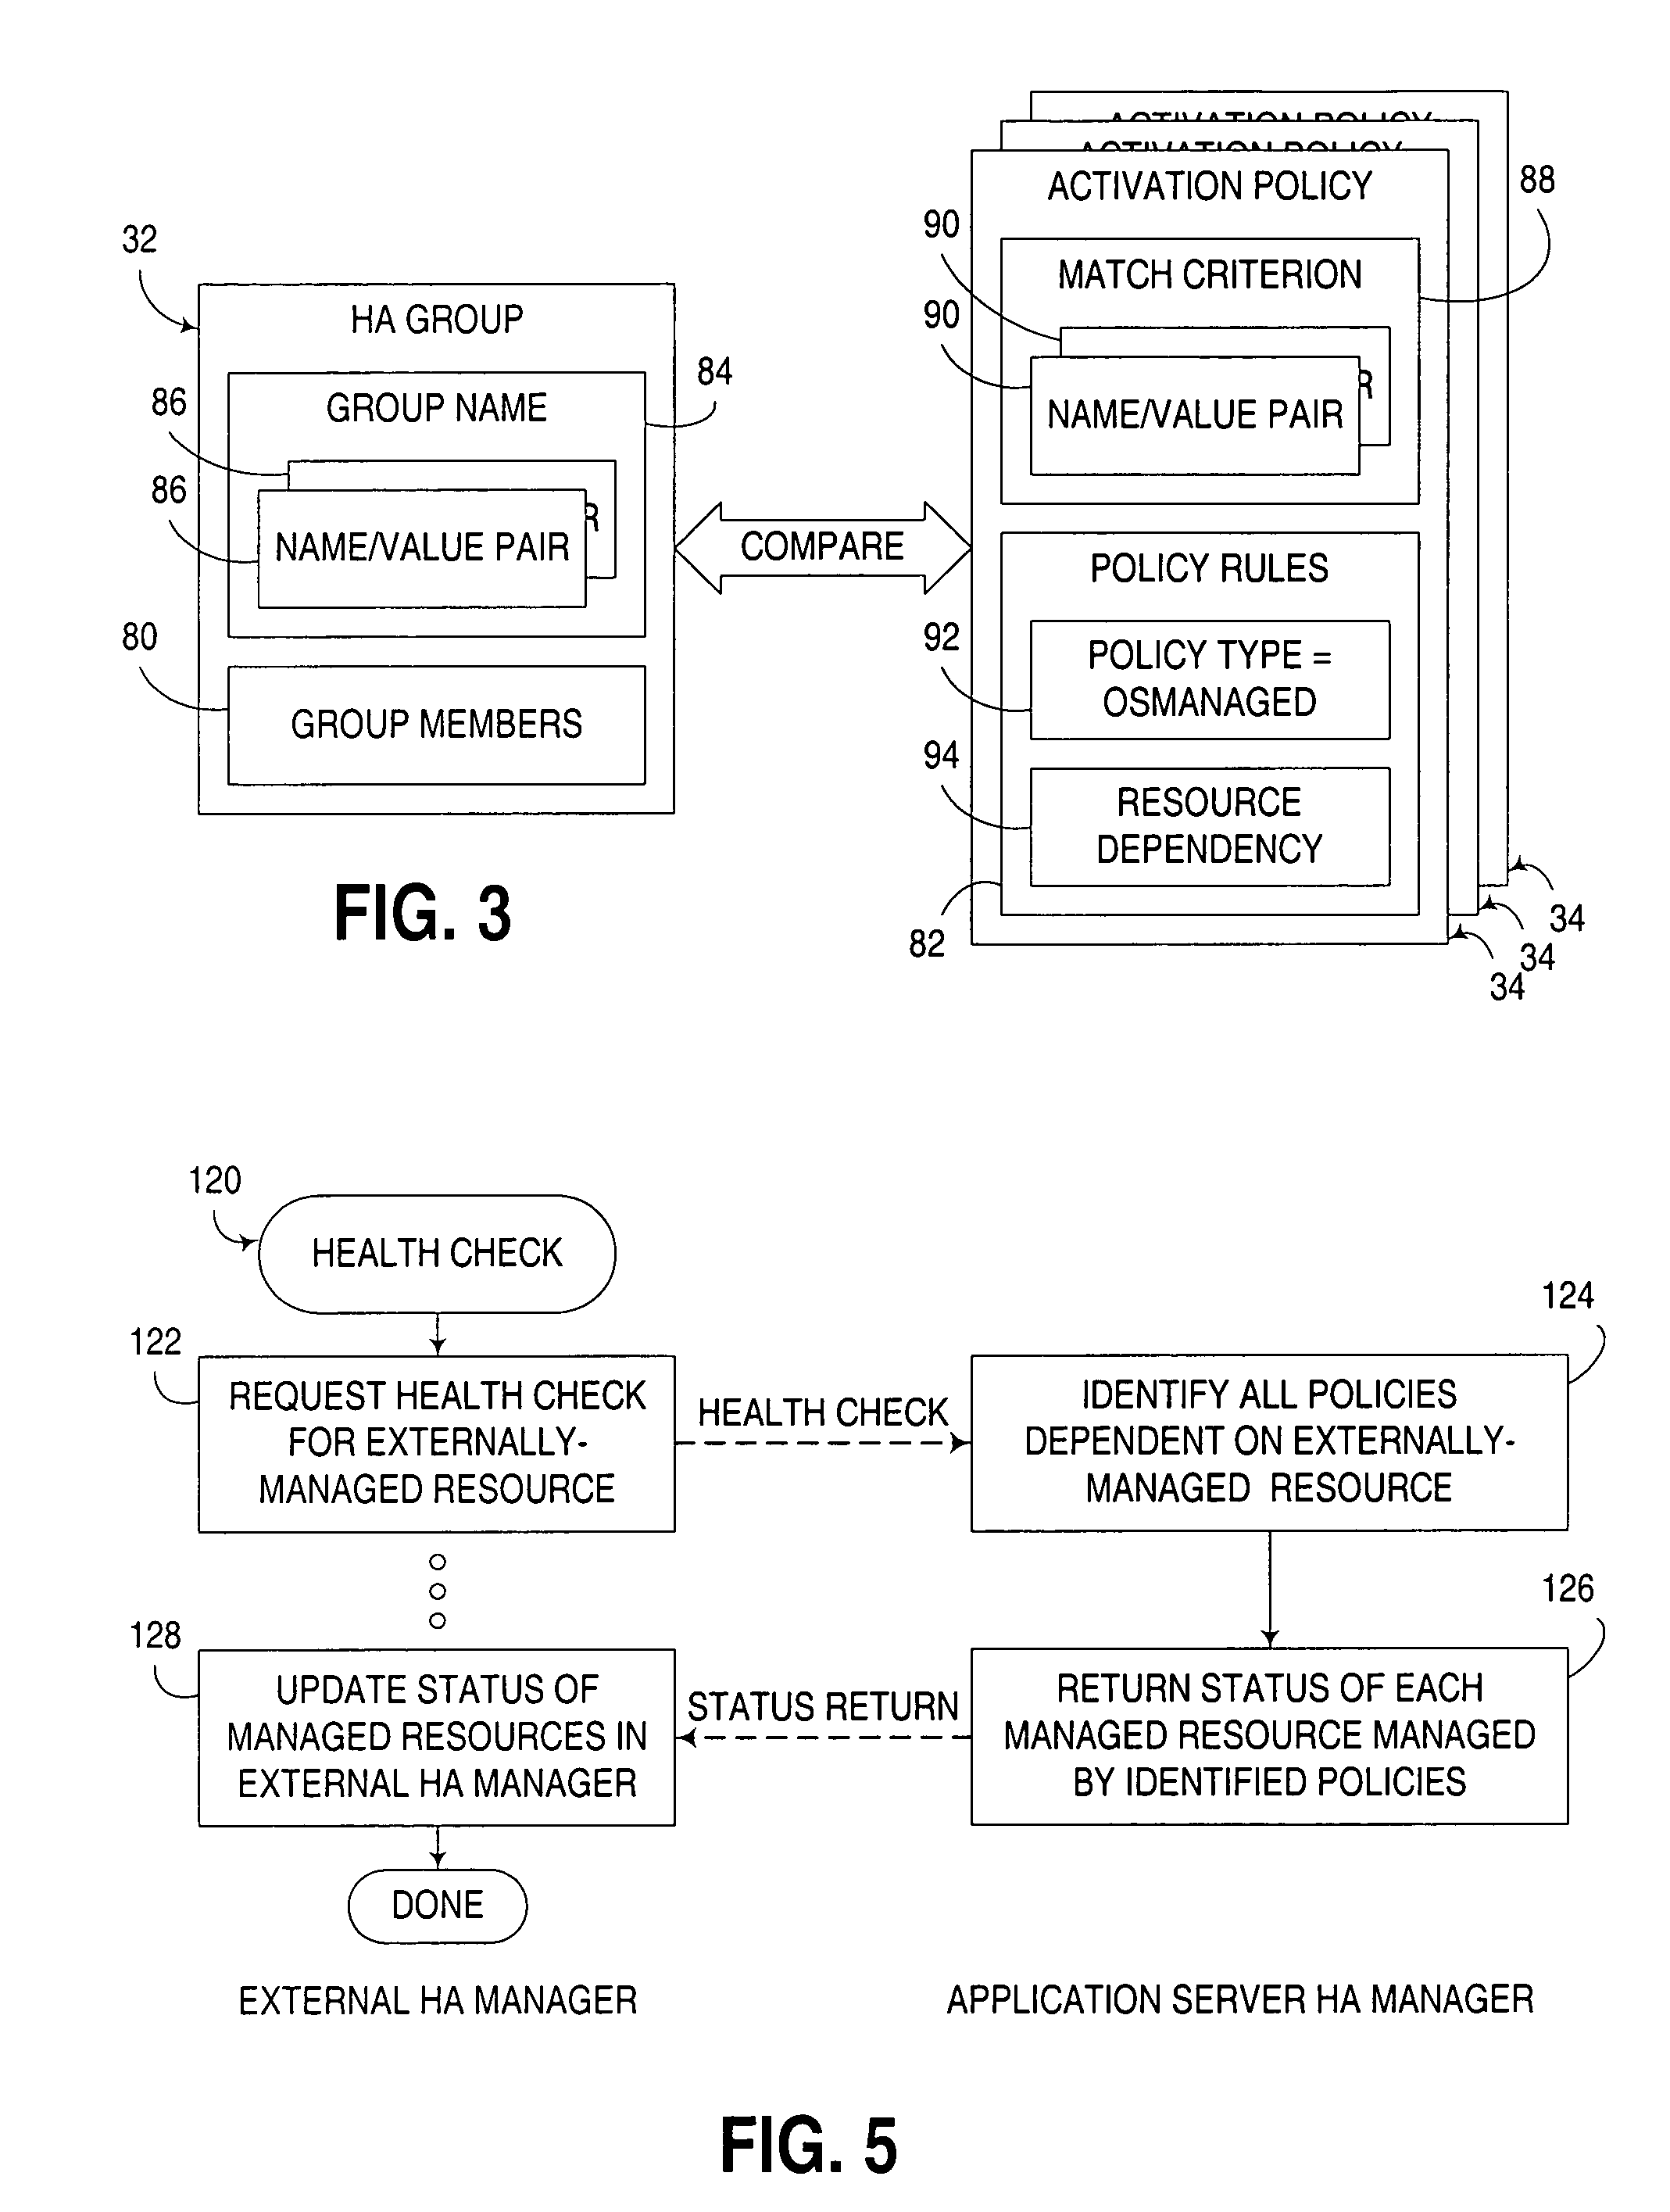 Application of resource-dependent policies to managed resources in a distributed computing system